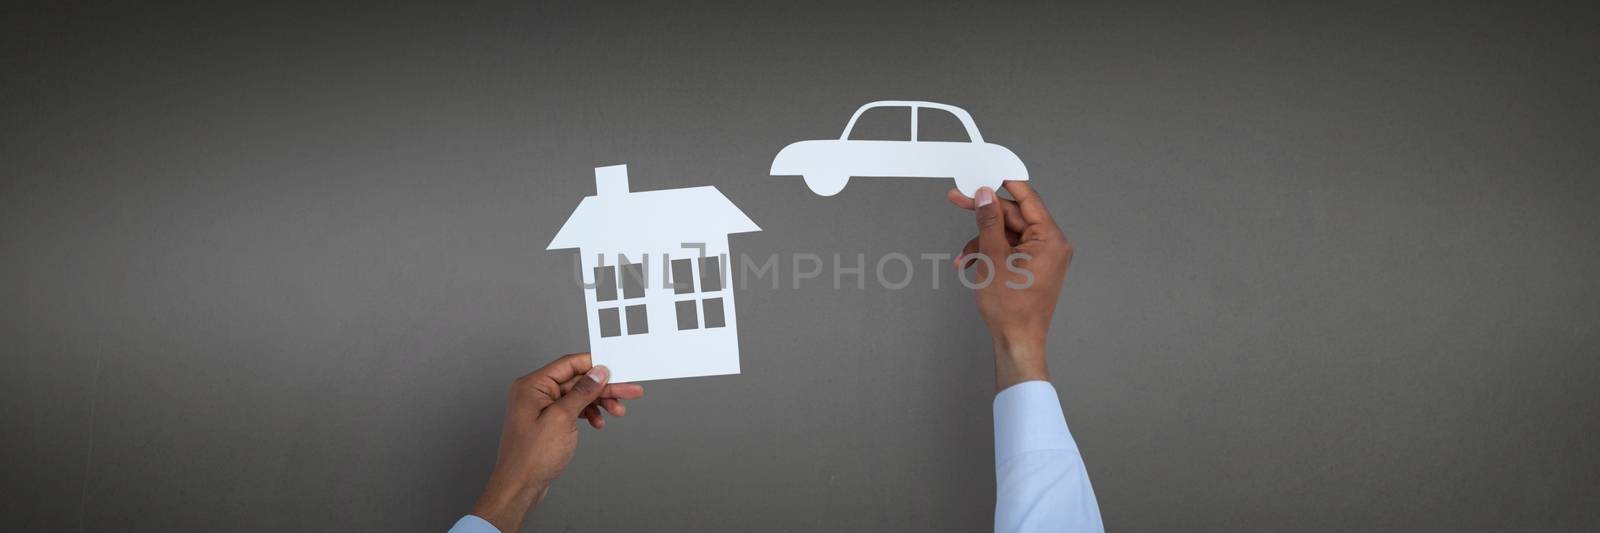 Digital composite of Car and house insurance concept against grey background